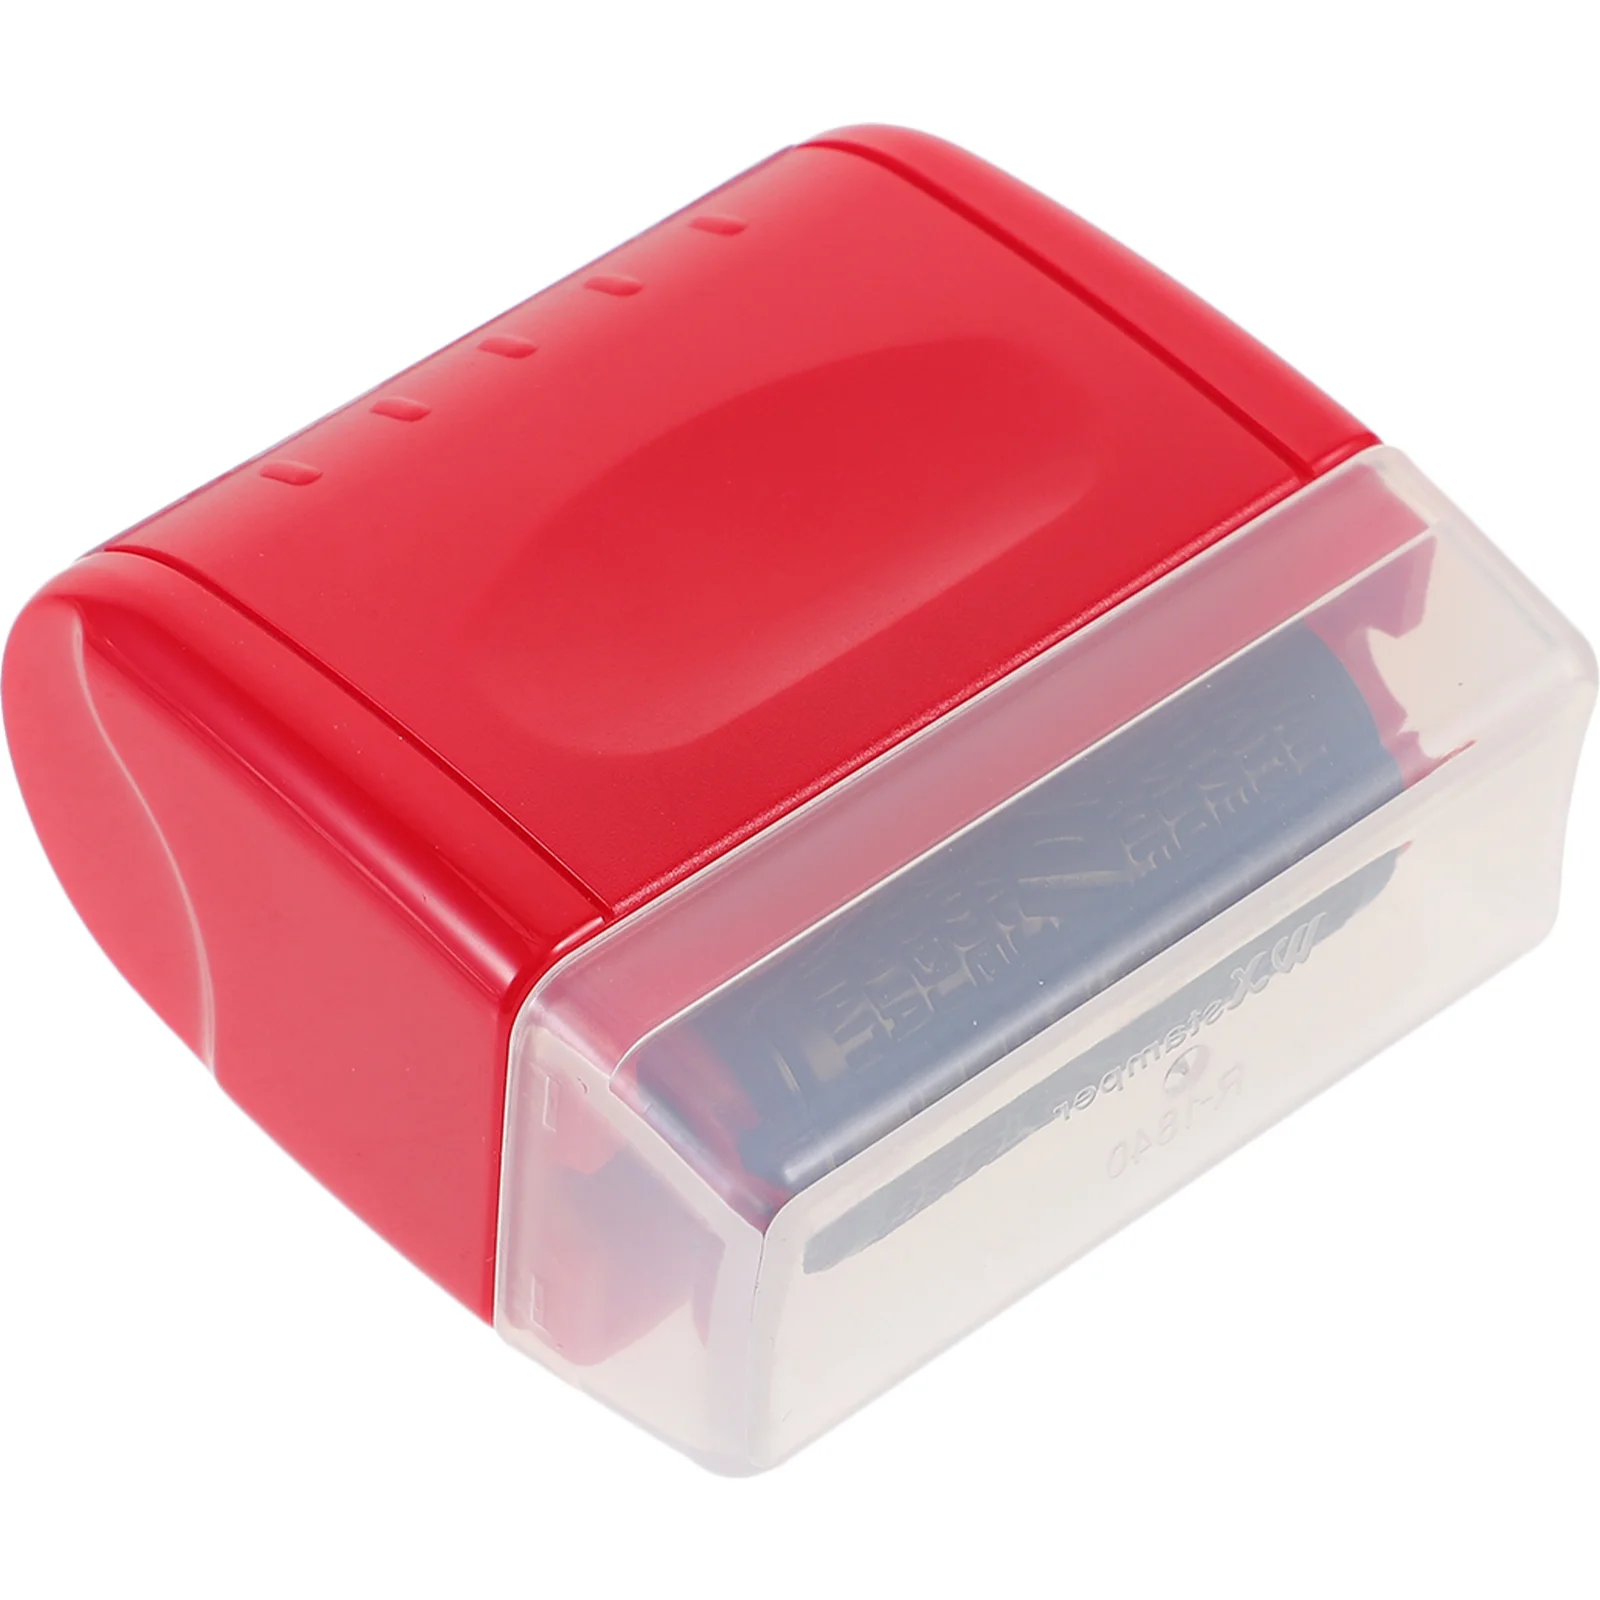 

Stamps Confidentiality Seal Wide Privacy Tool for Information Red Protection Home Secret Roller